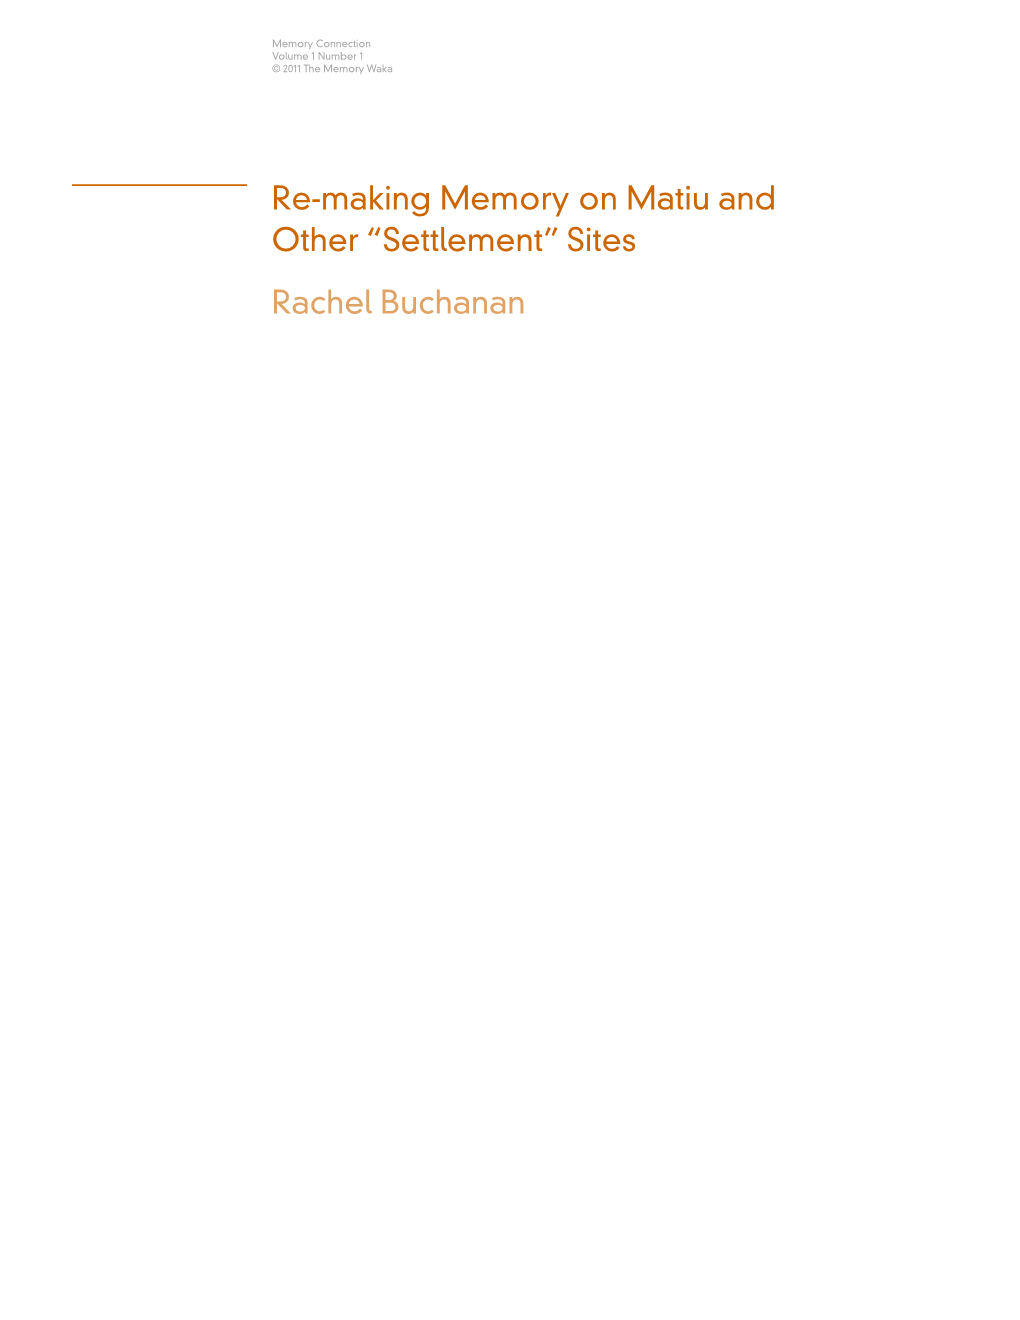 Re-Making Memory on Matiu and Other “Settlement” Sites Rachel Buchanan Memory Connection Volume 1 Number 1 © 2011 the Memory Waka